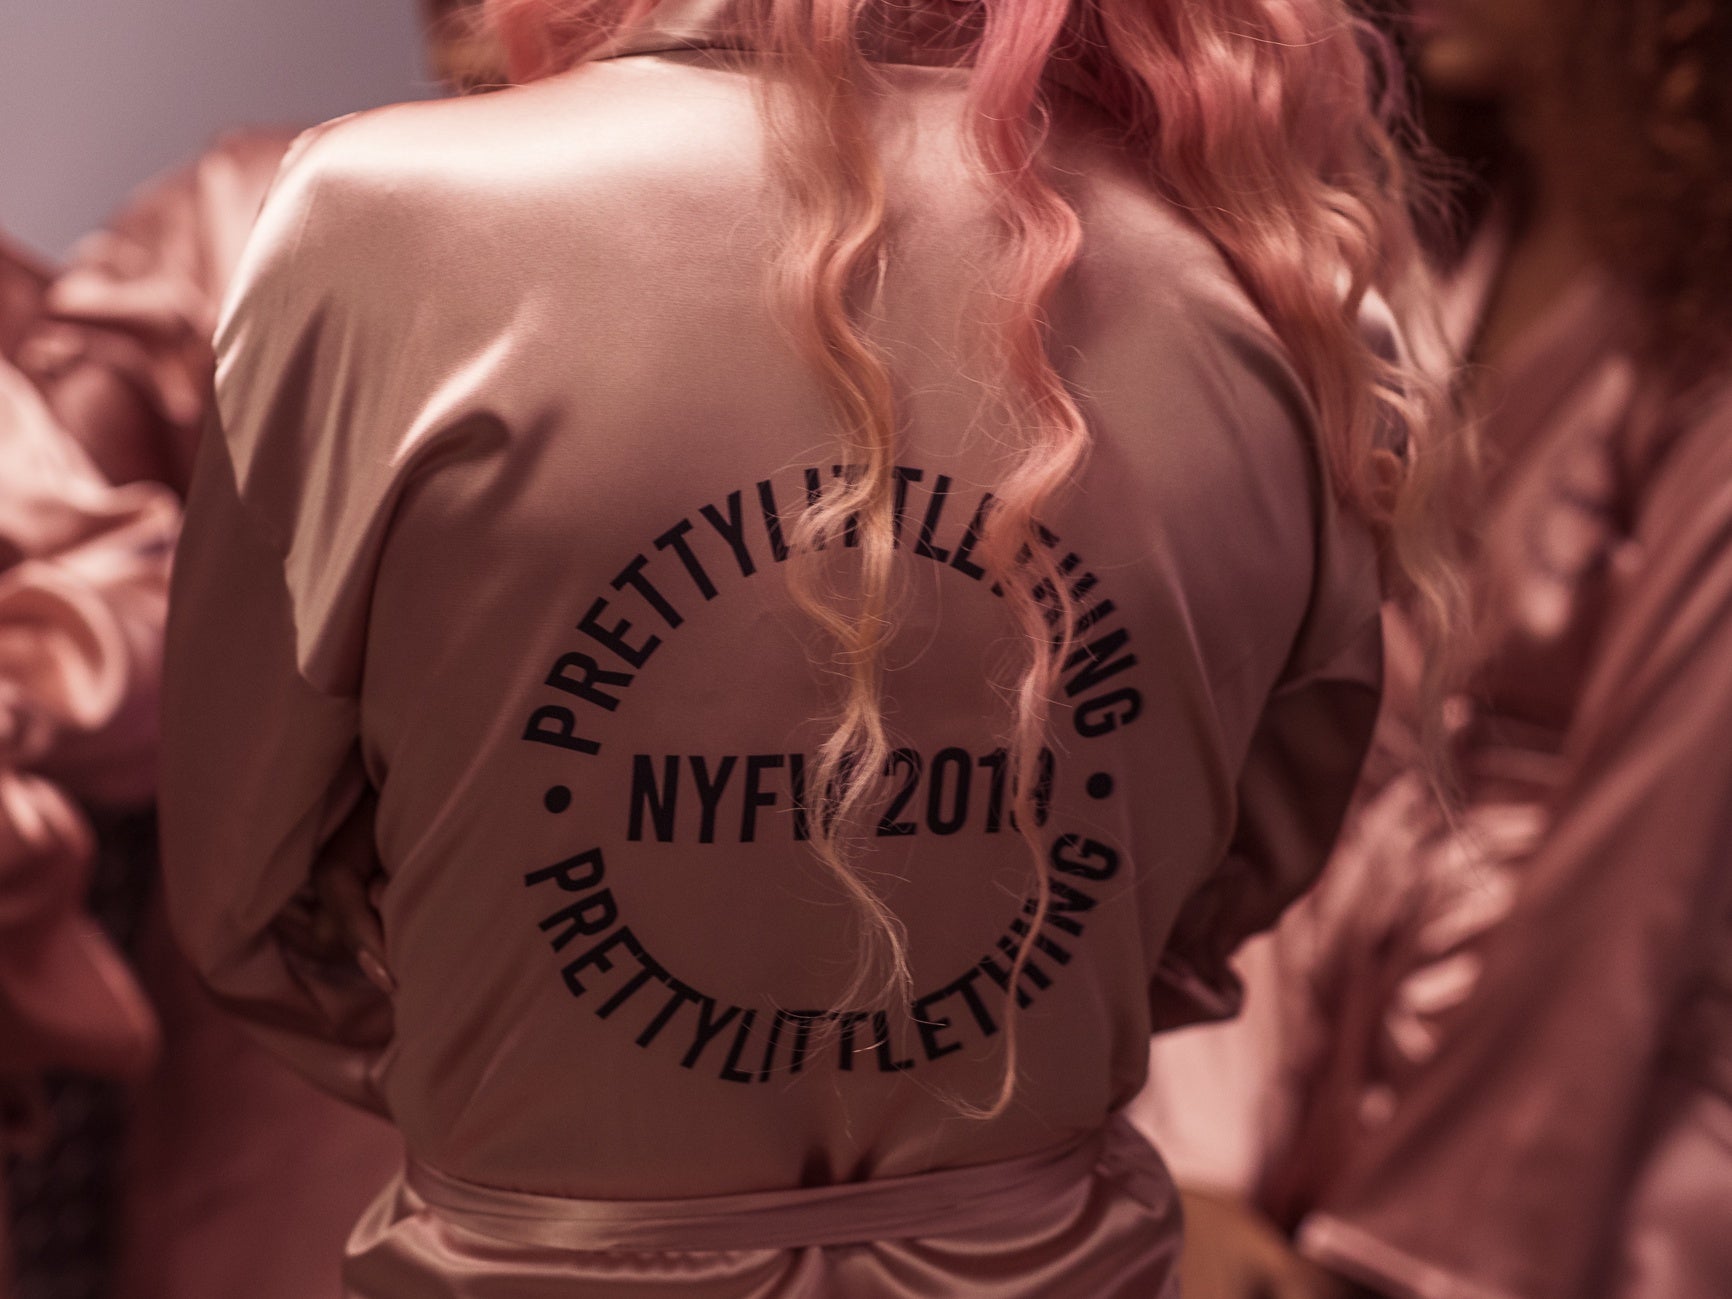 Behind The Scenes At The Saweetie x Pretty Little Thing Show